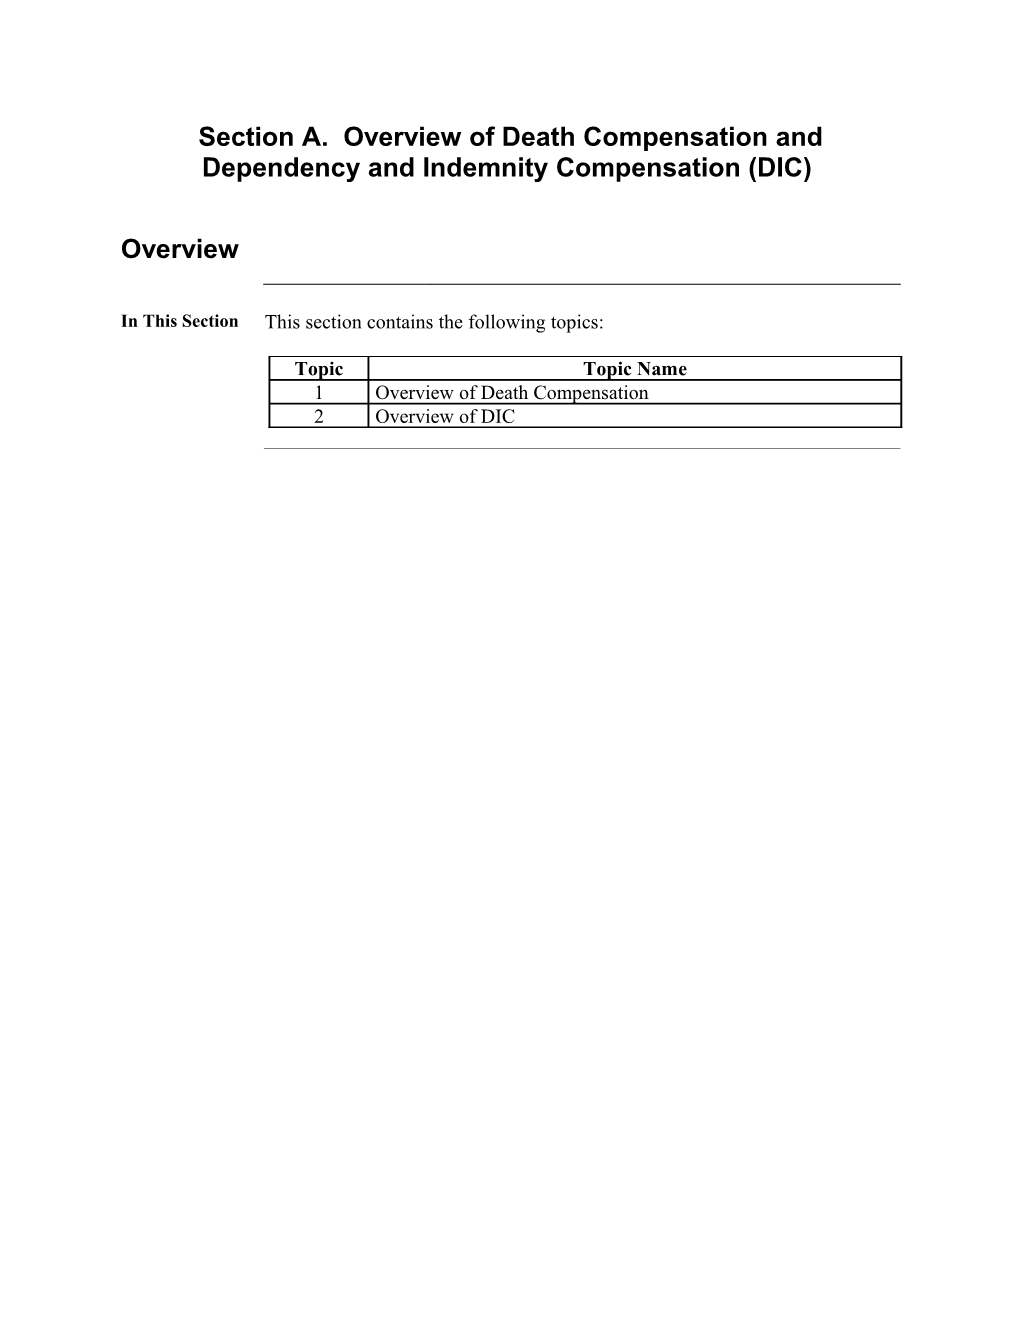 Section A. Overview Ofdeath Compensation and Dependency and Indemnity Compensation (DIC)